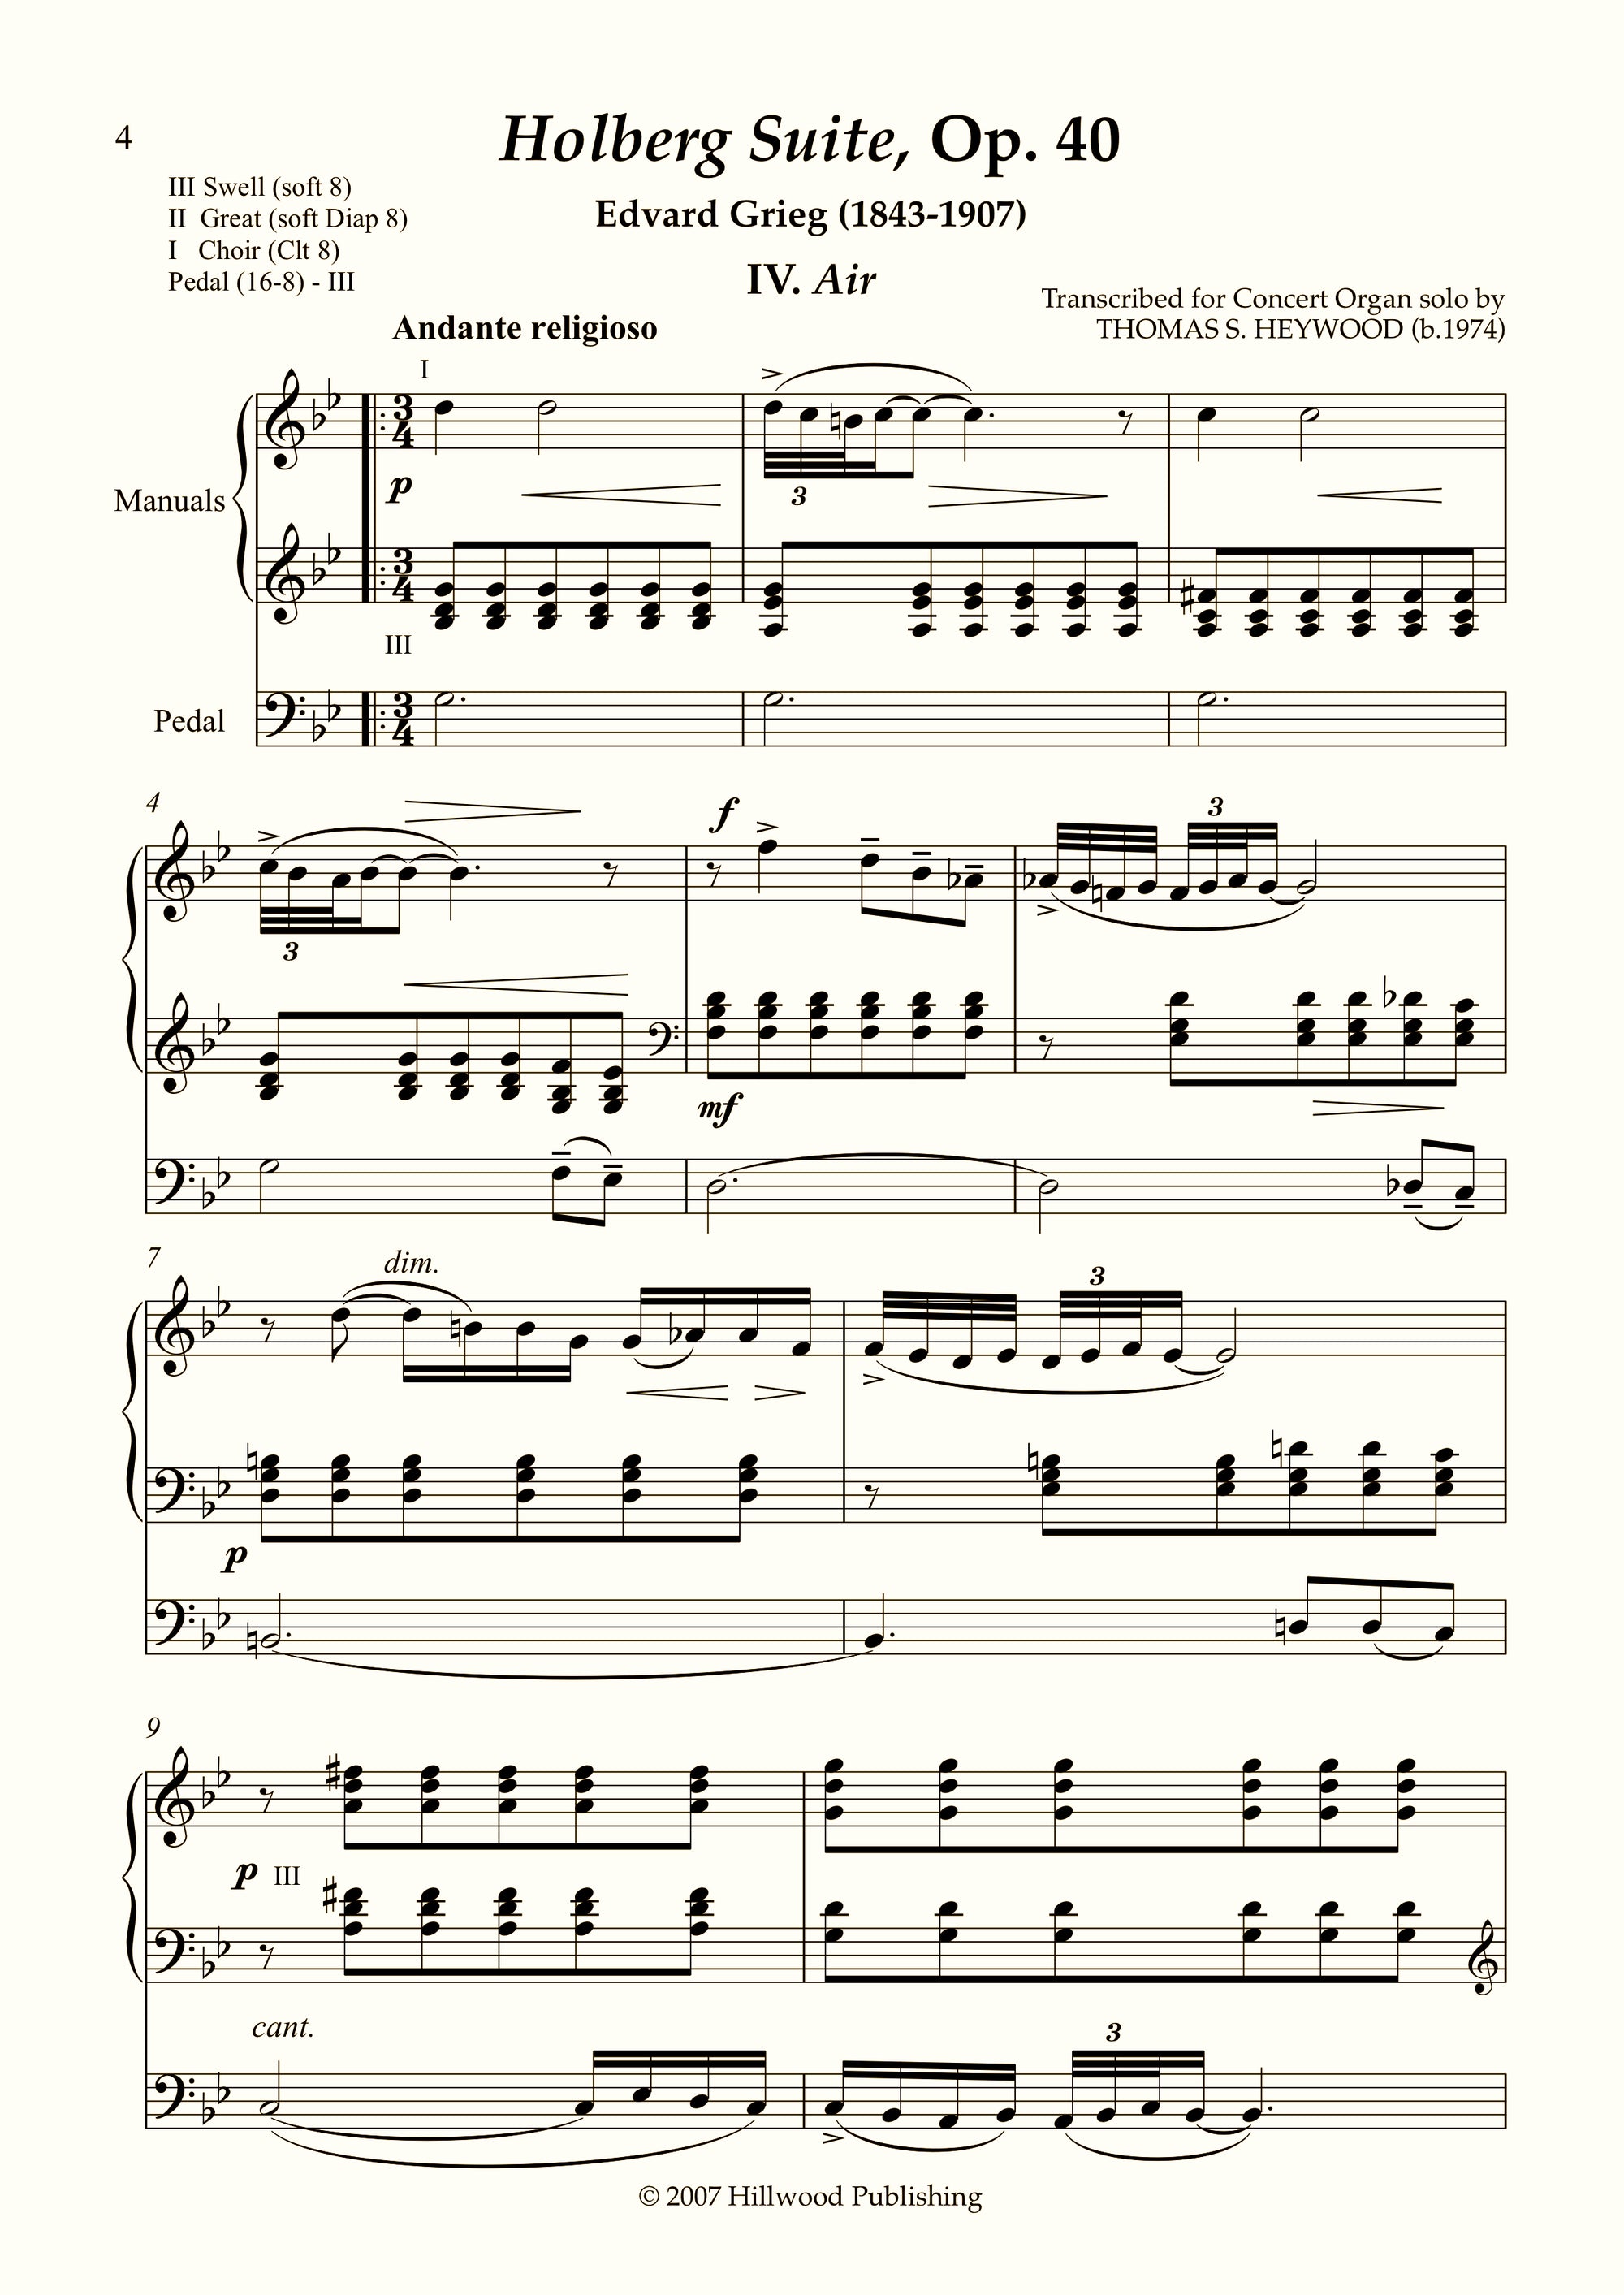 Grieg/Heywood - Air from the Holberg Suite, Op. 40 (Score)